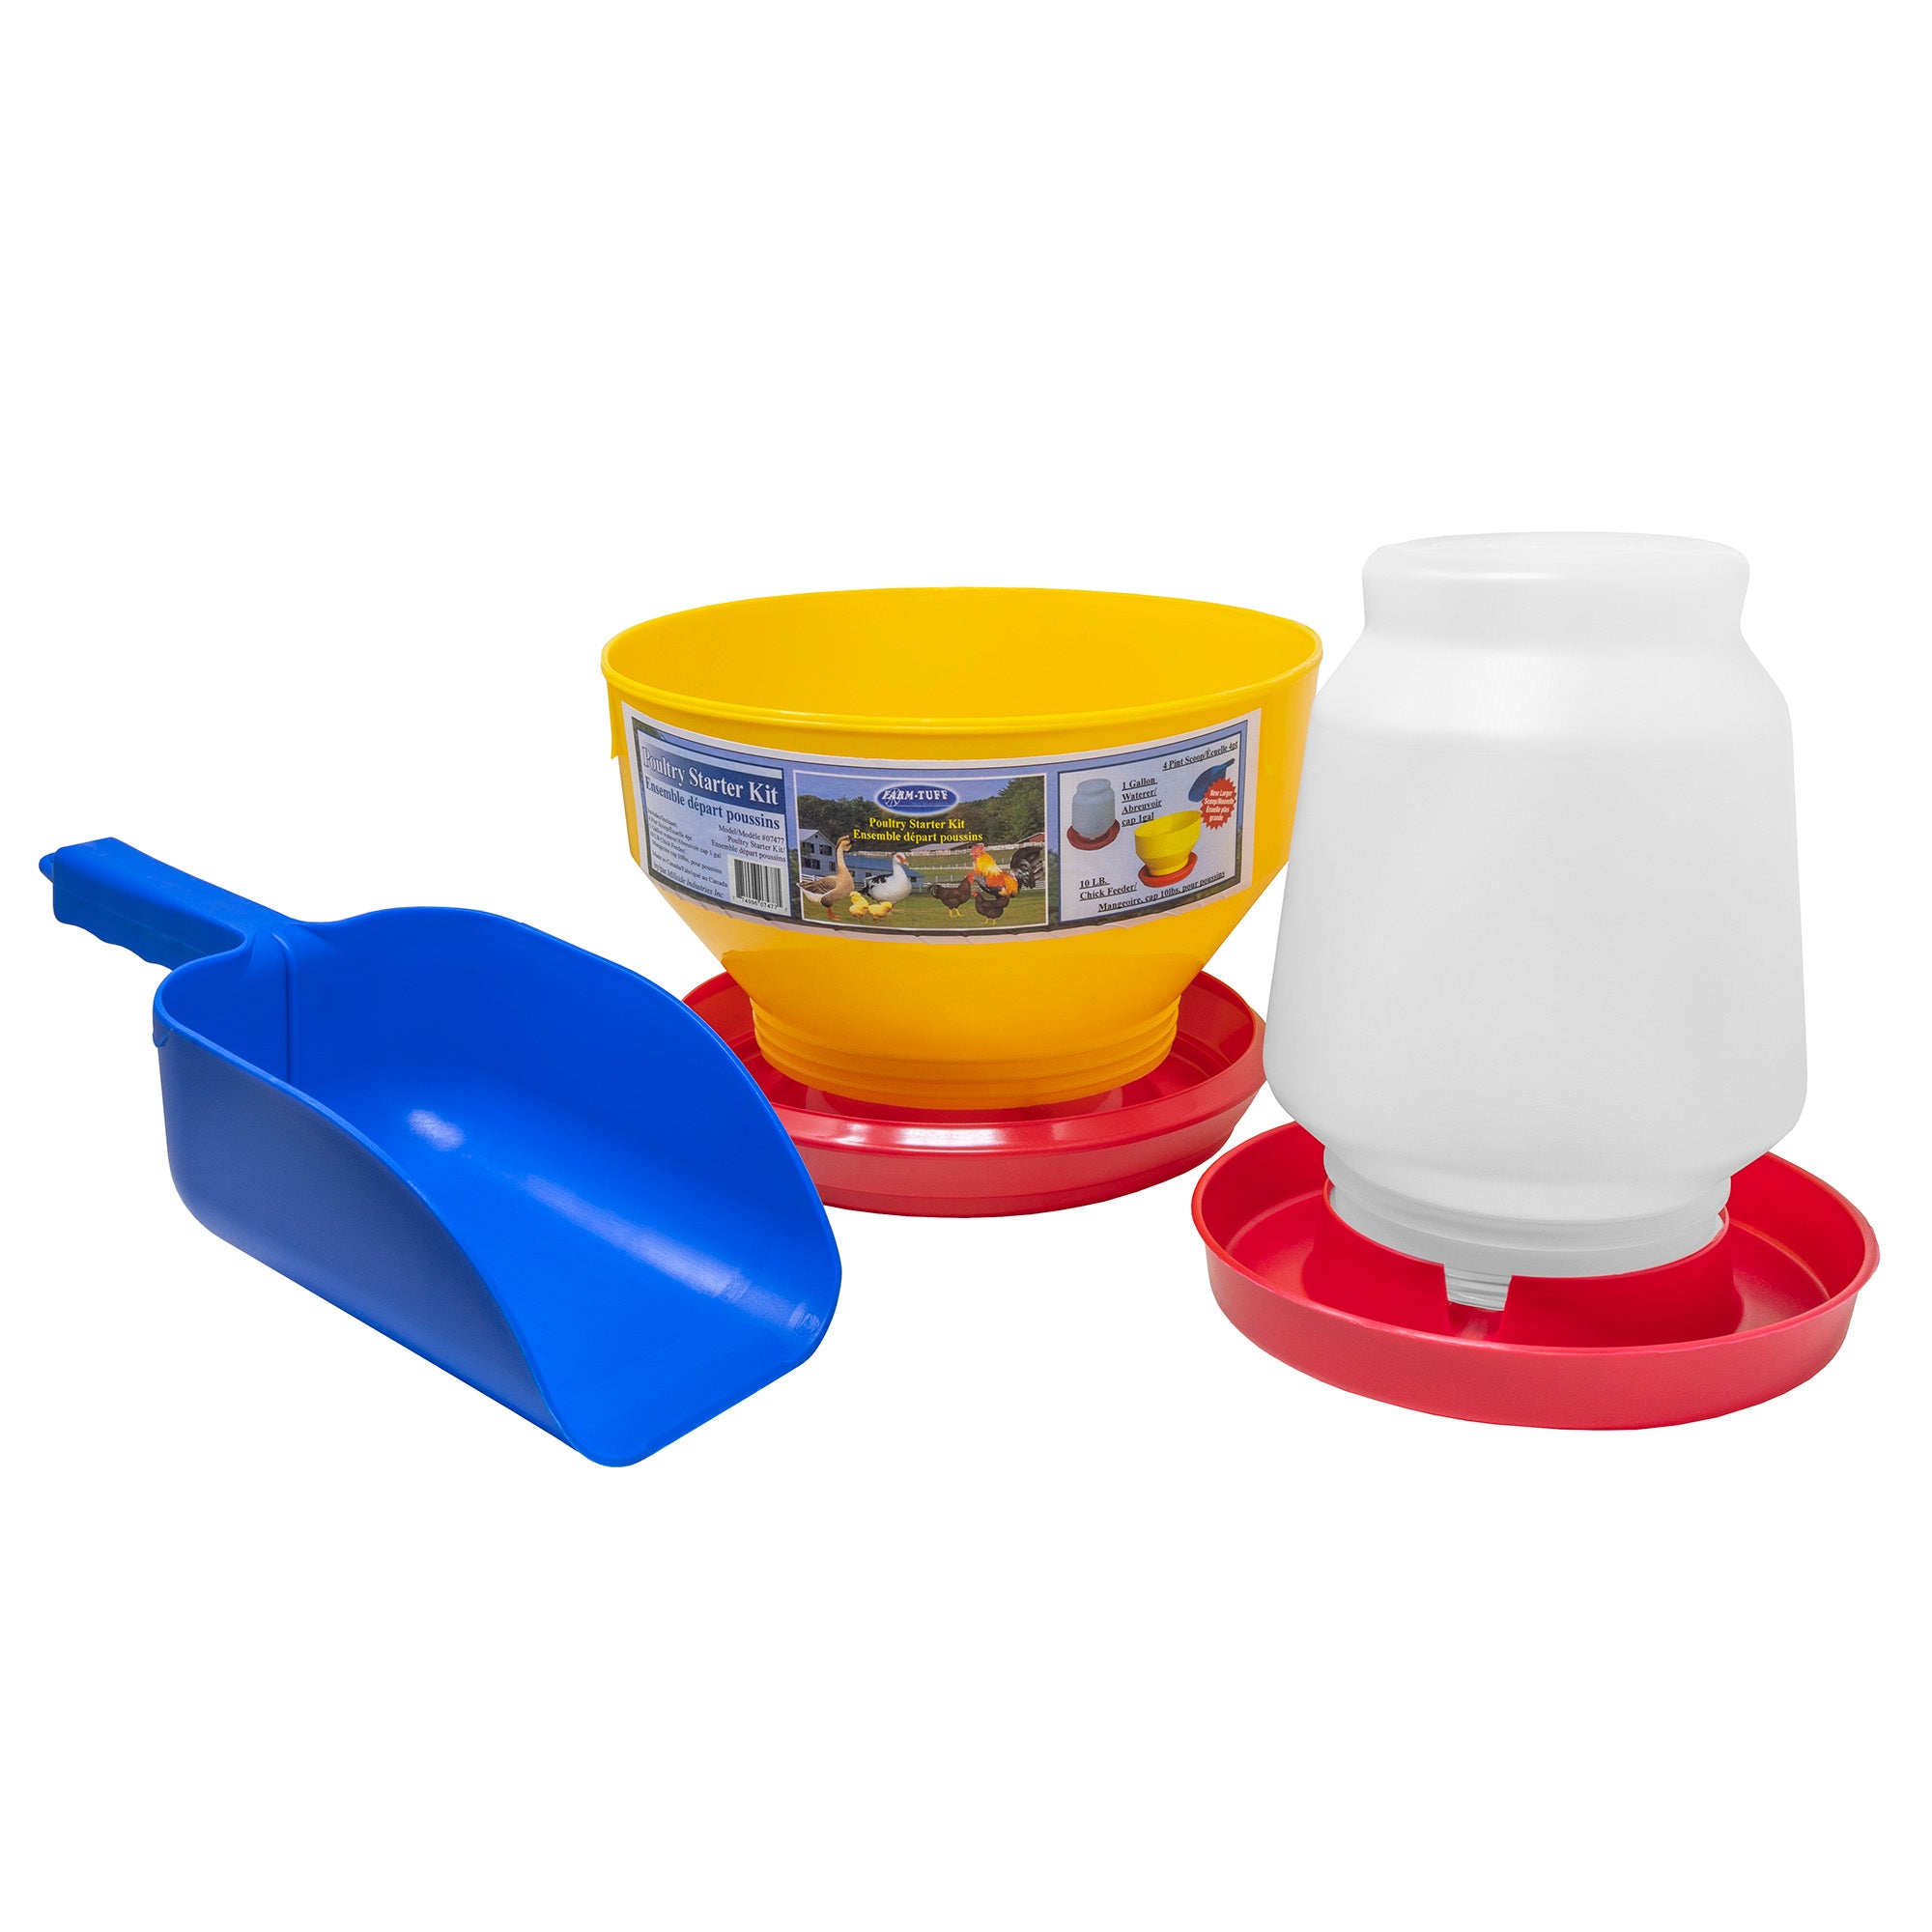 Farm Tuff Durable Poultry and Game Bird All In One Three Piece Starter Kit for Chickens